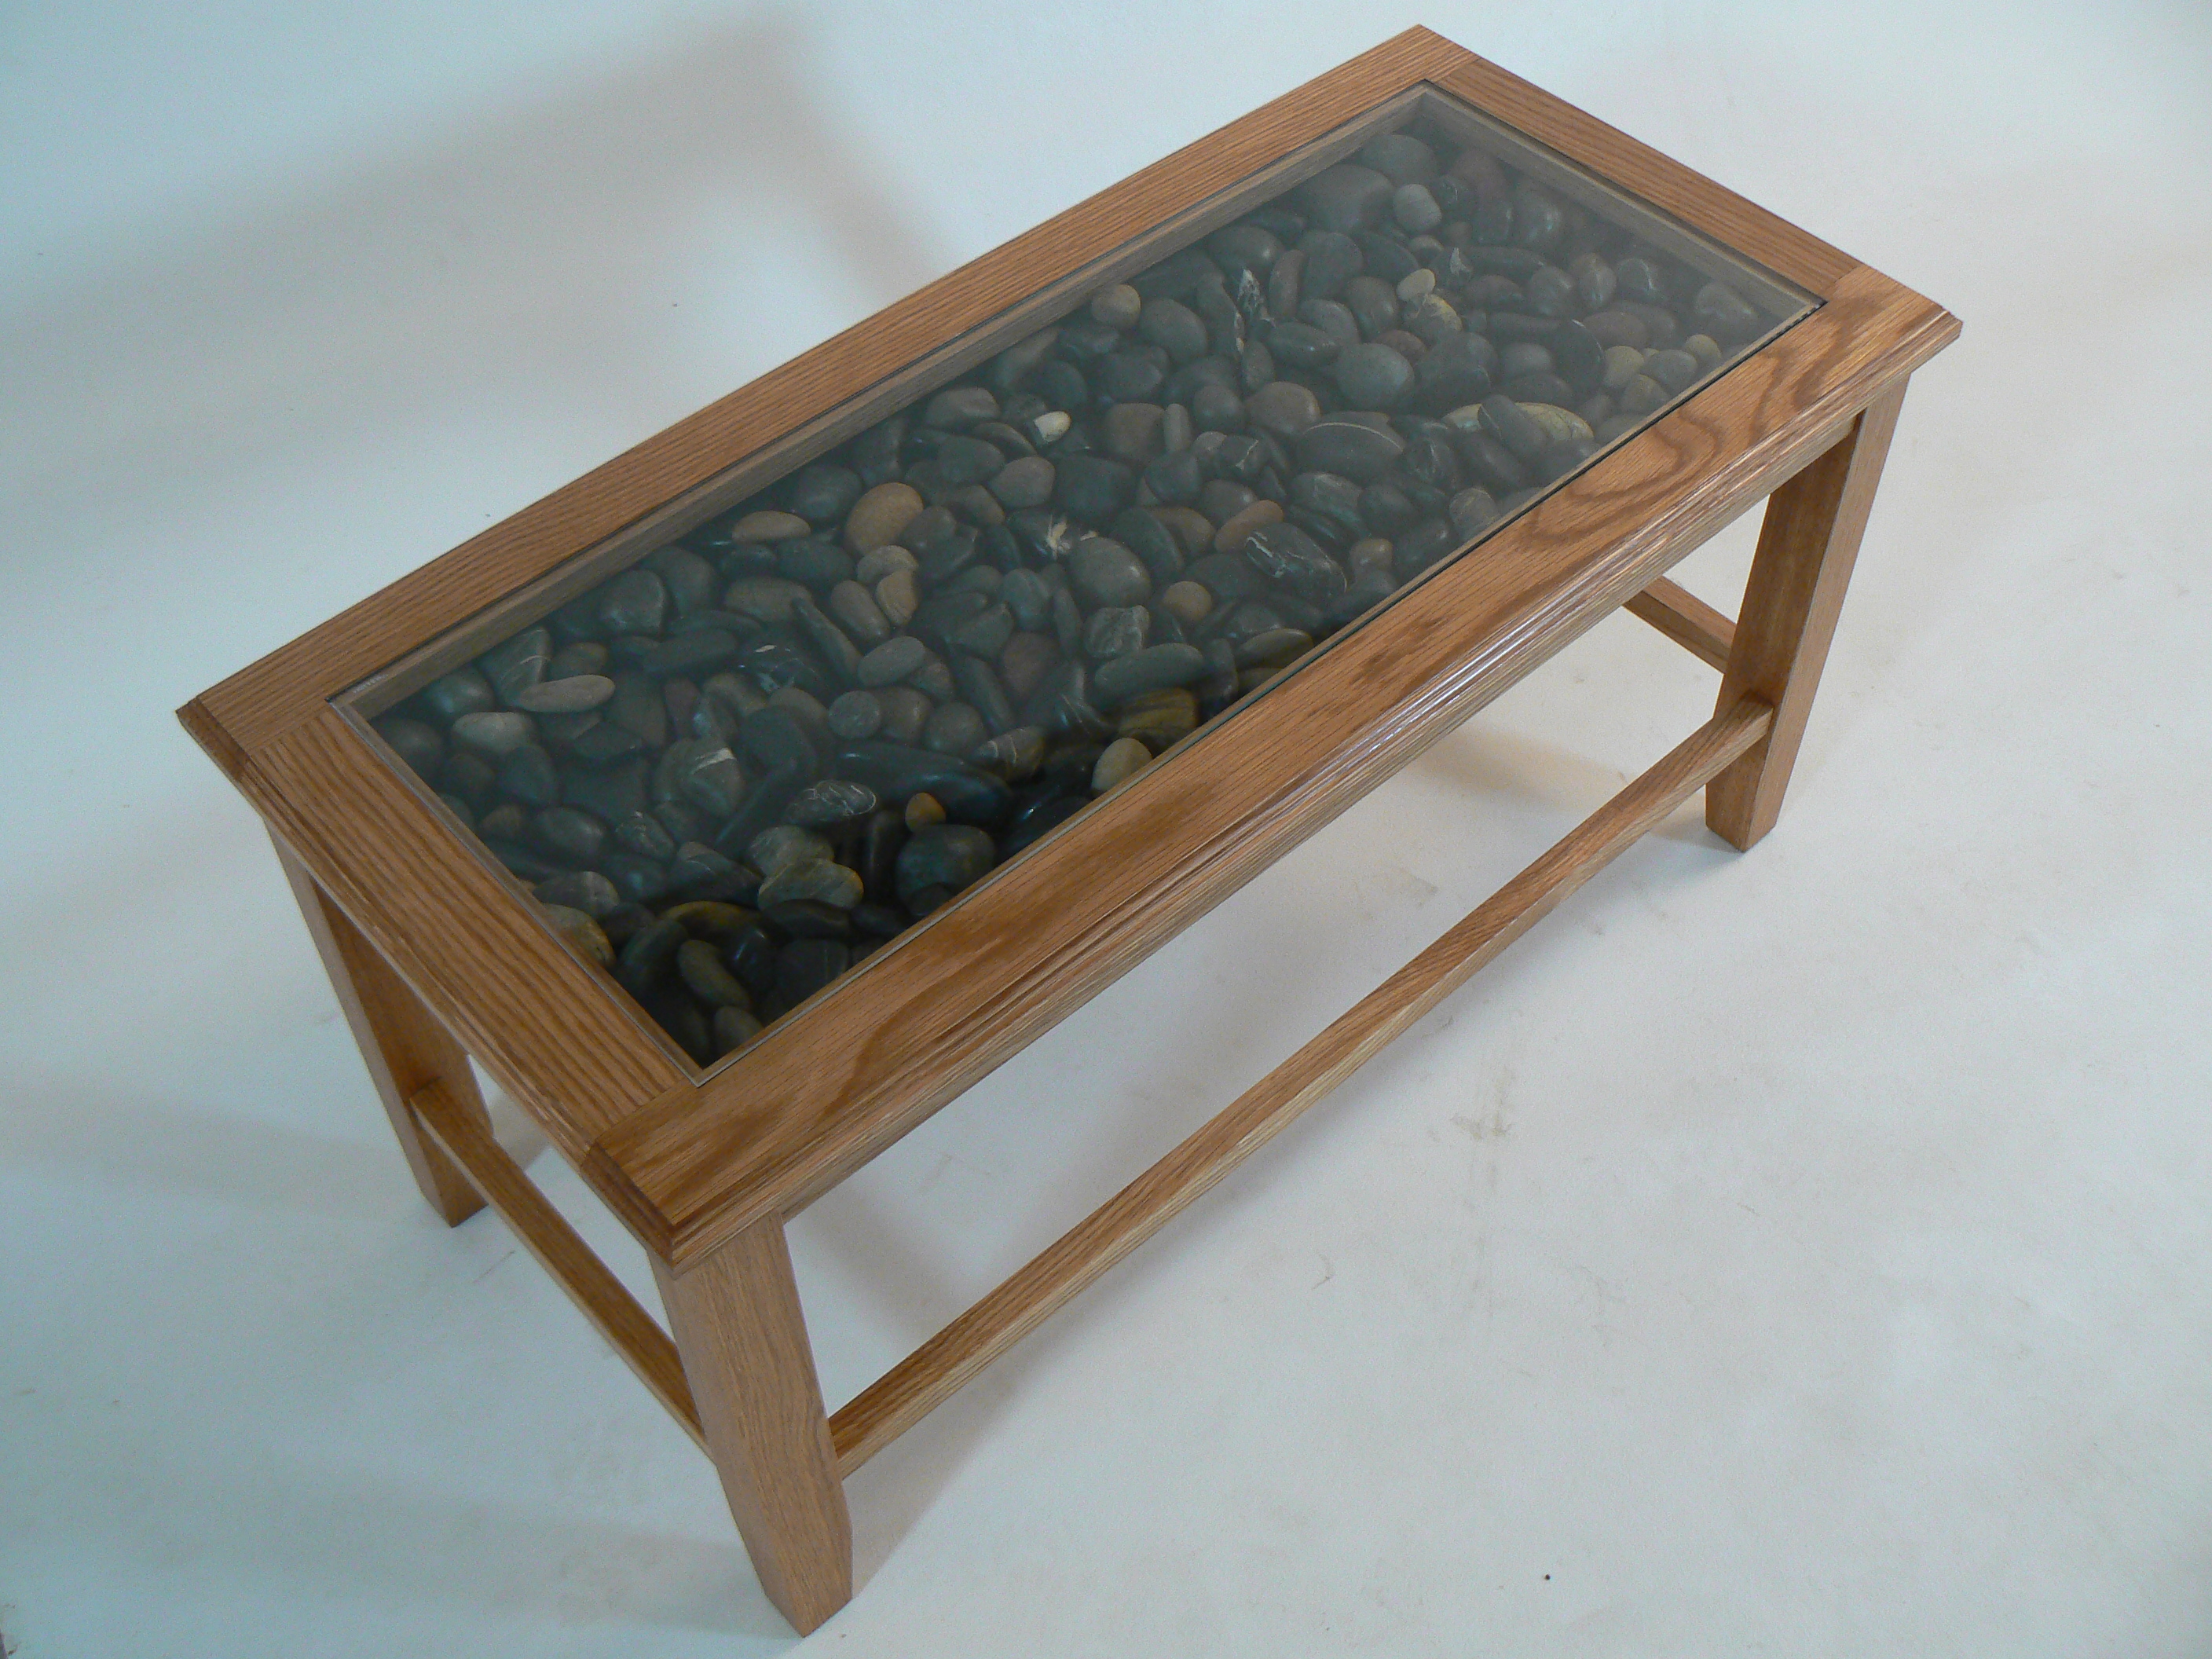 wooden coffee table designs with glass top photo - 2